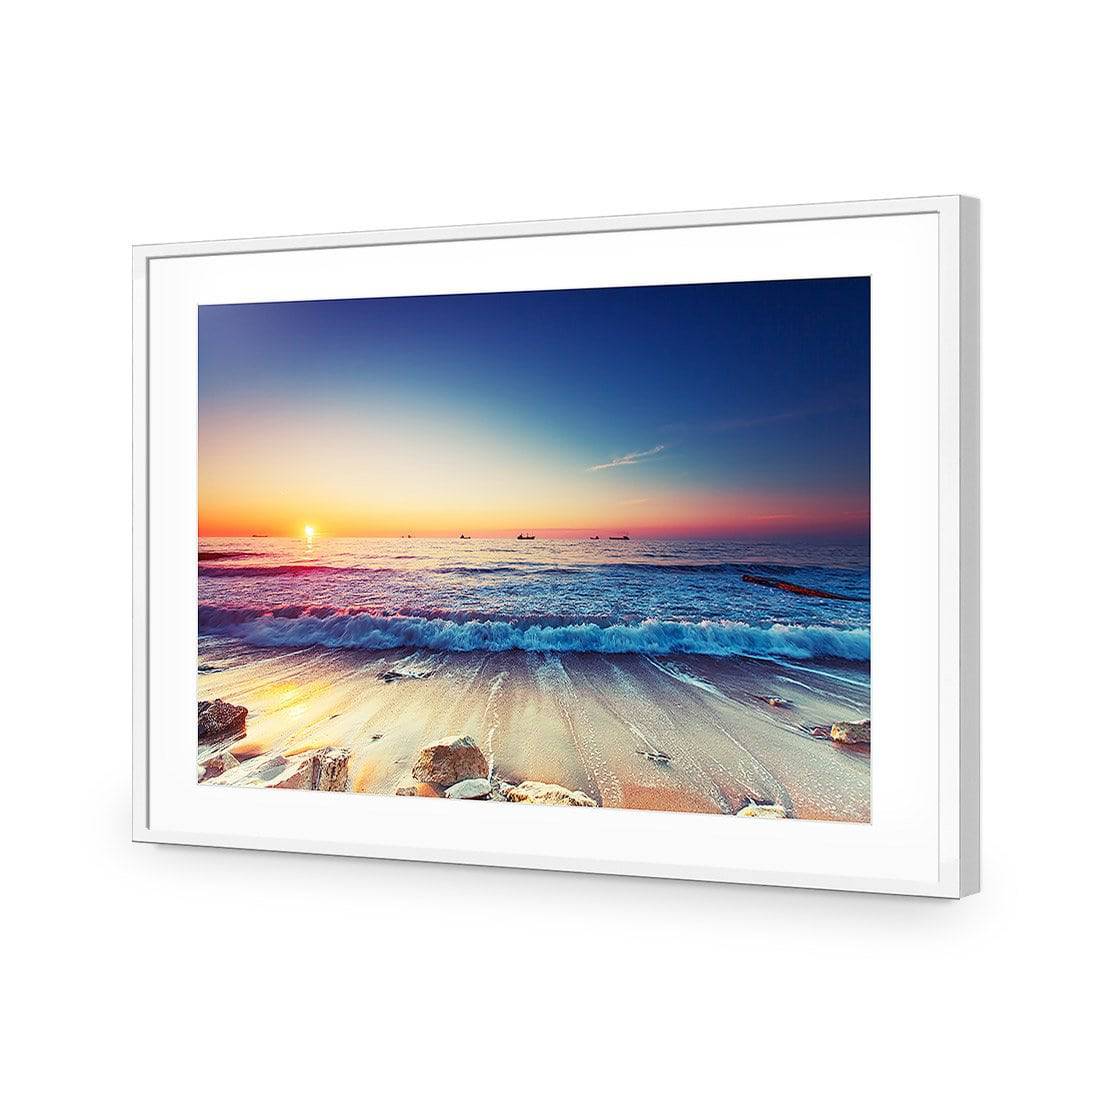 High Tide Sunset-Acrylic-Wall Art Design-With Border-Acrylic - White Frame-45x30cm-Wall Art Designs